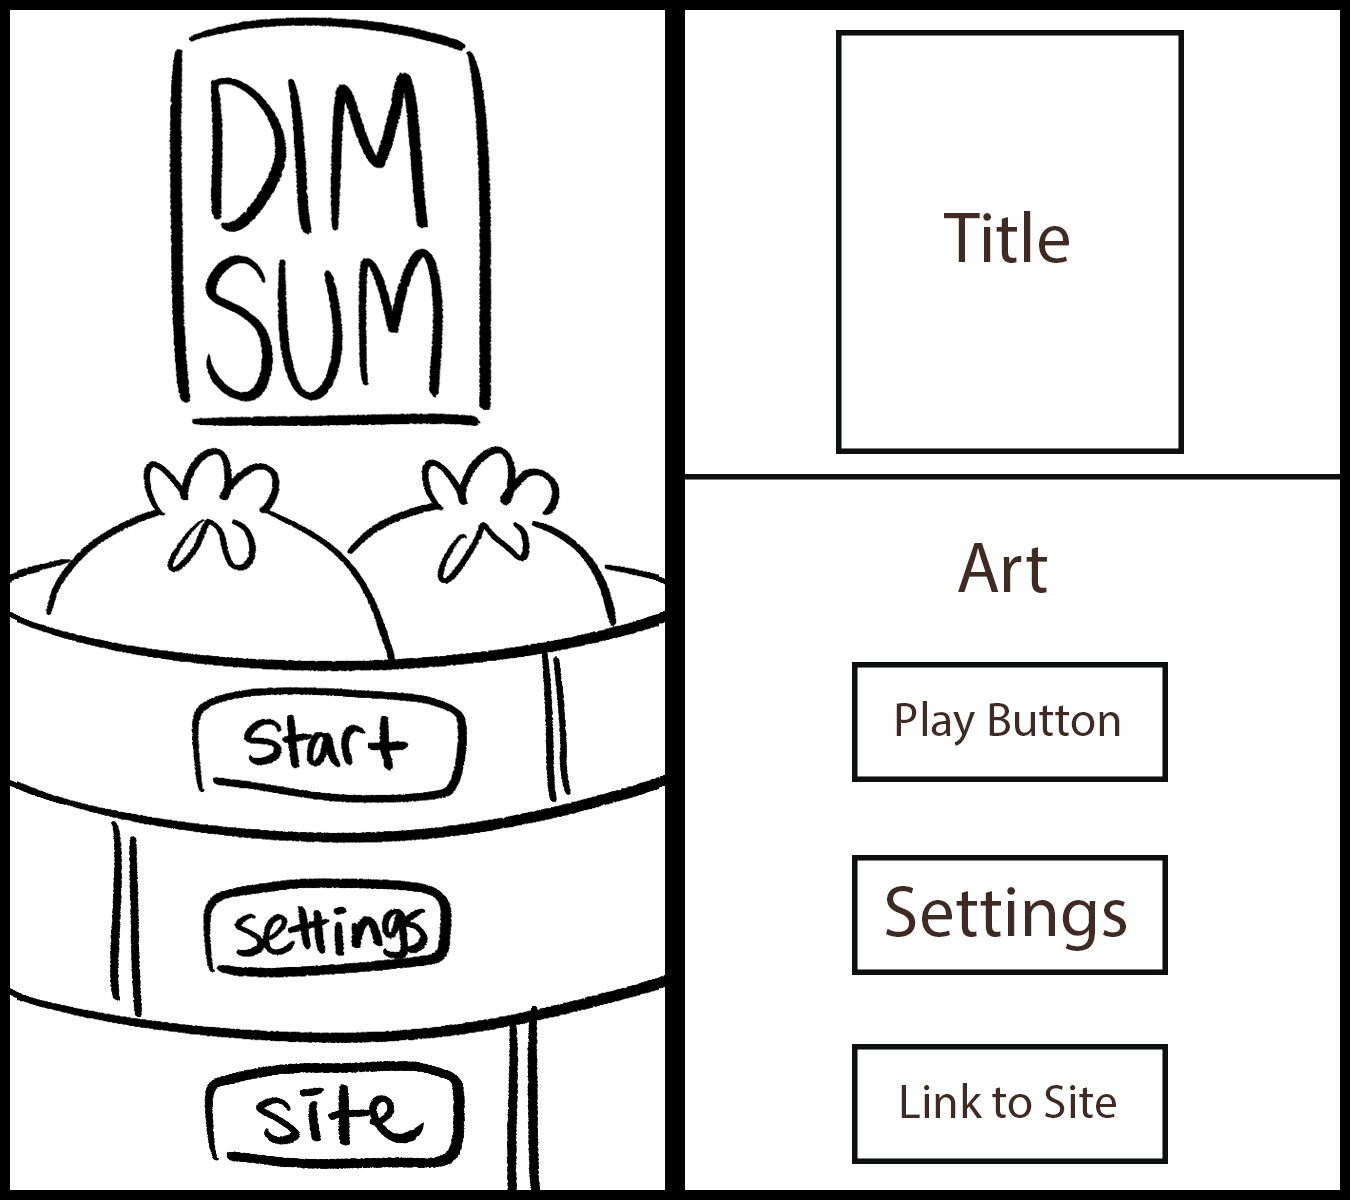 Imagining if Dim Sum were a rhythm game for mobile devices (start-up screen).